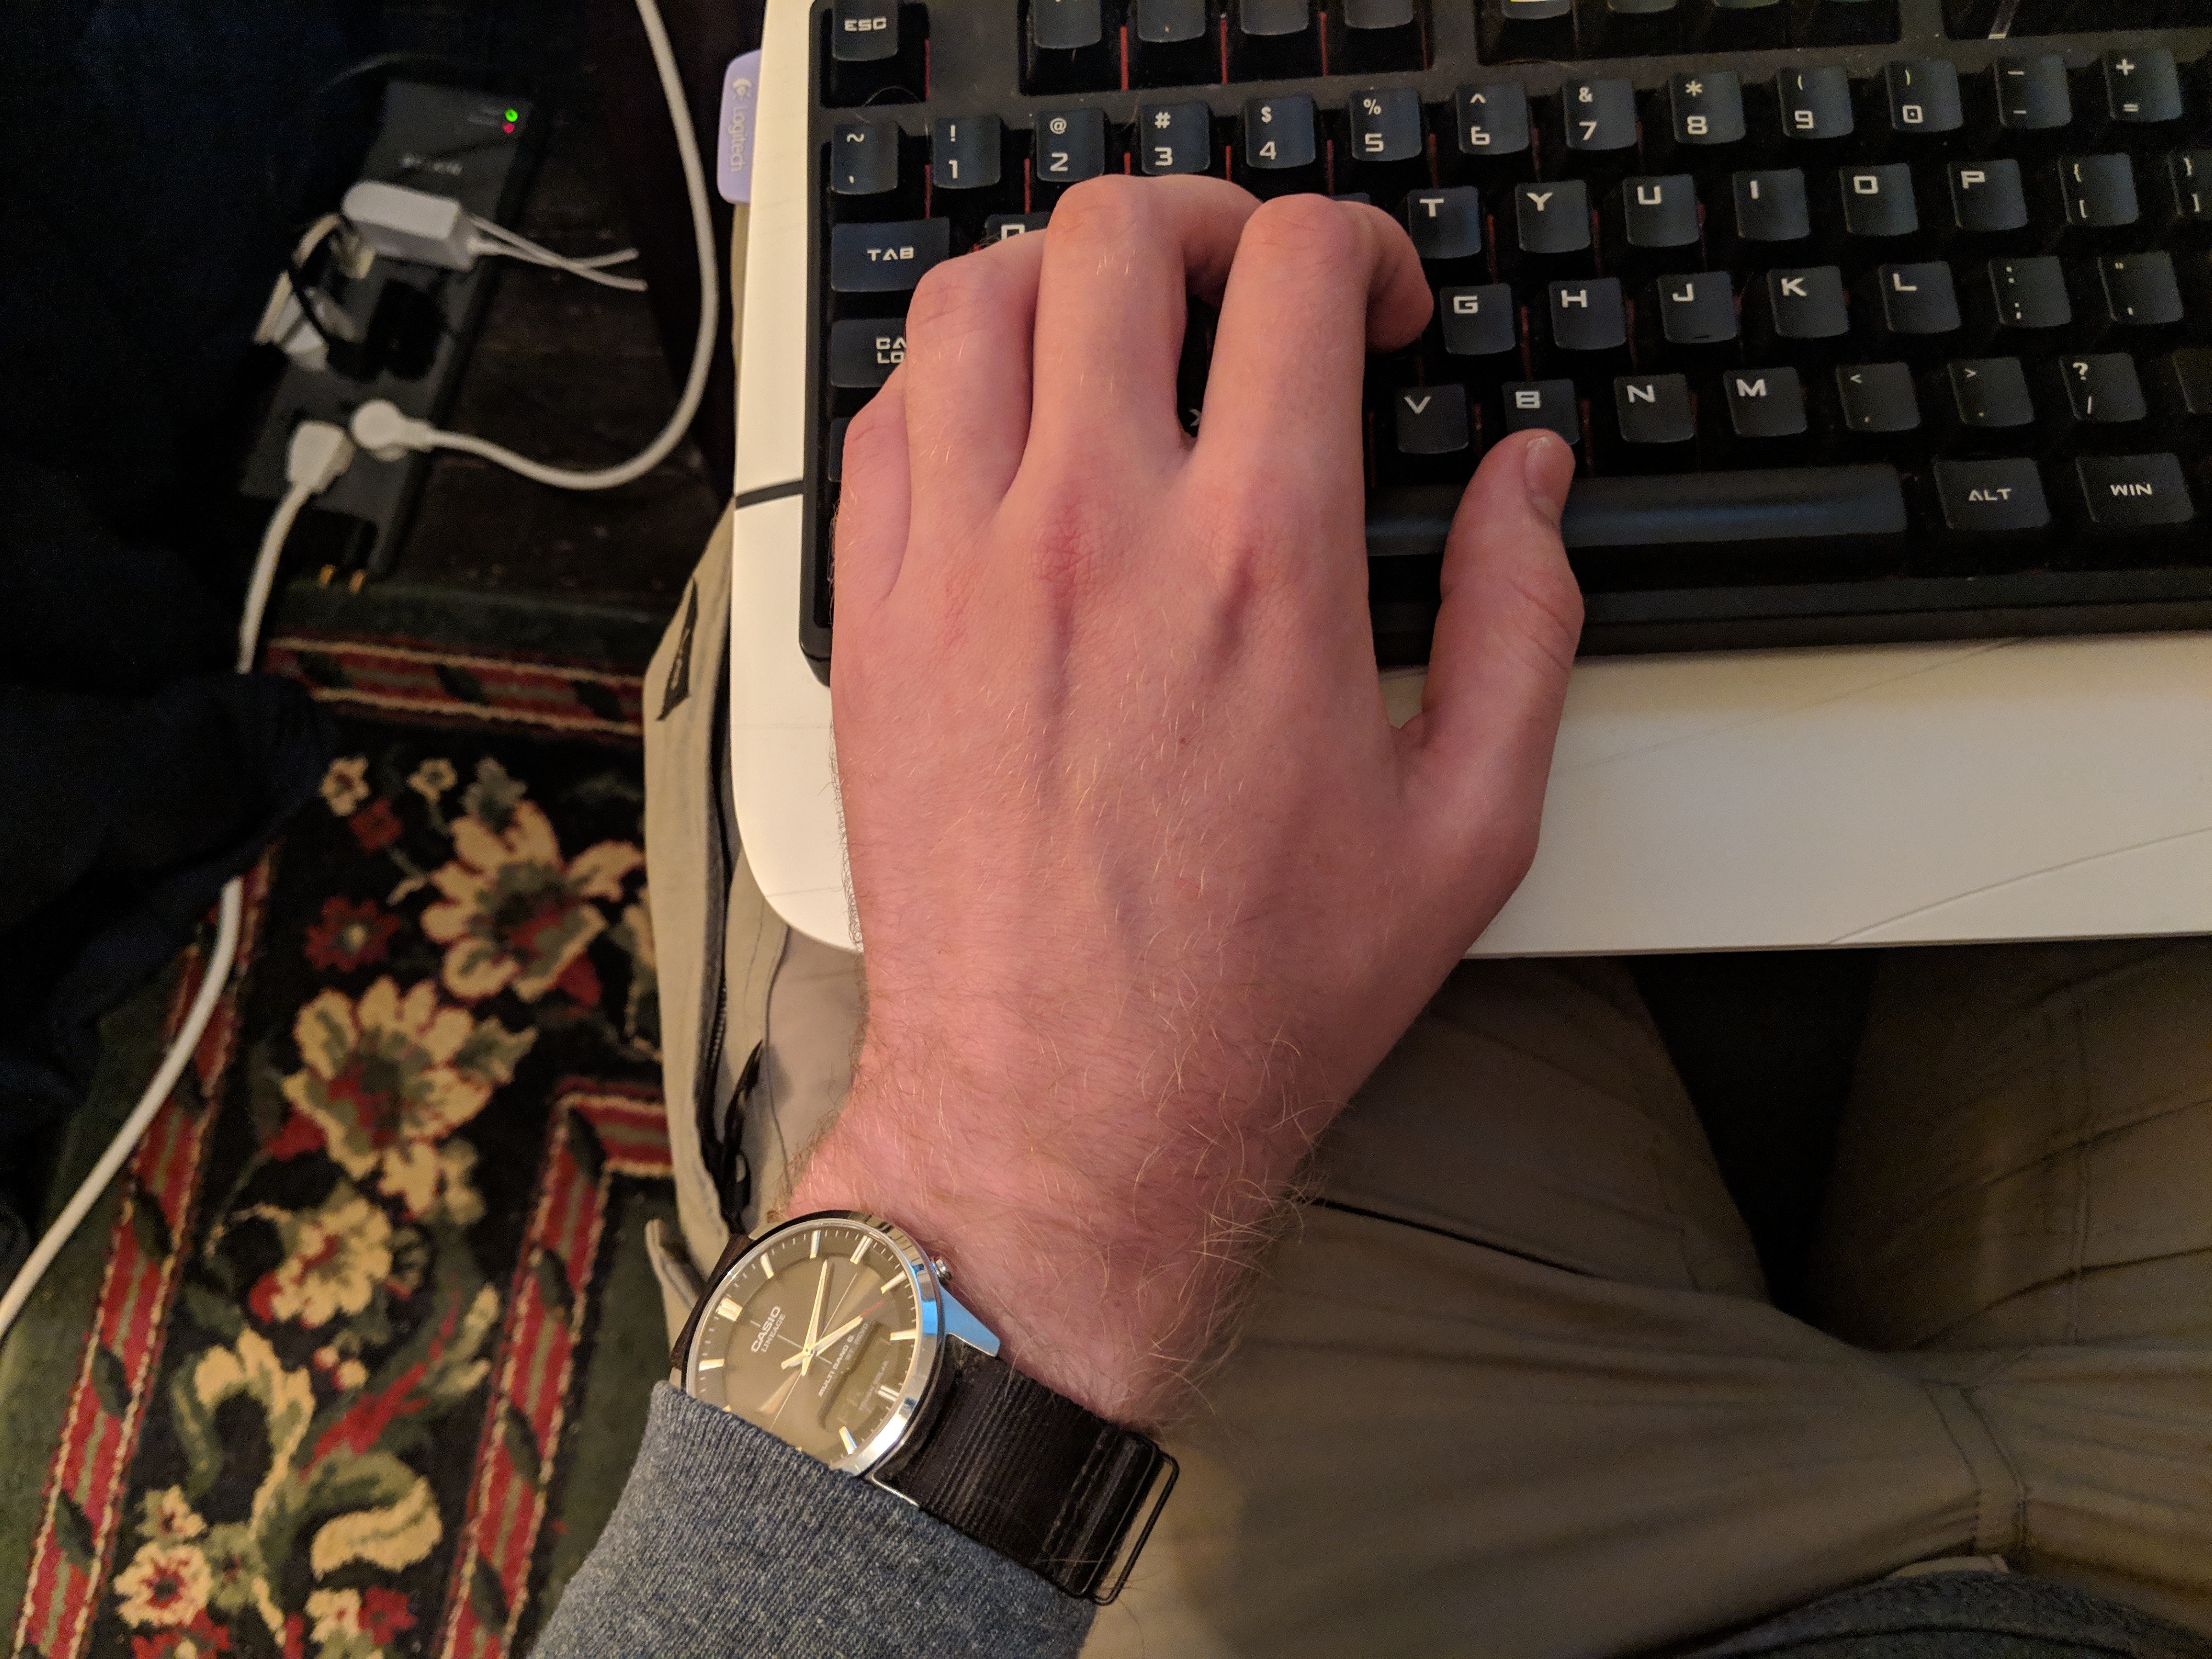 
                       Figure 1: The wrist angle is the big problem. This is my left hand shown on the home row of the CM Storm Quickfire Rapid Tenkeyless (Cherry Reds)
                  